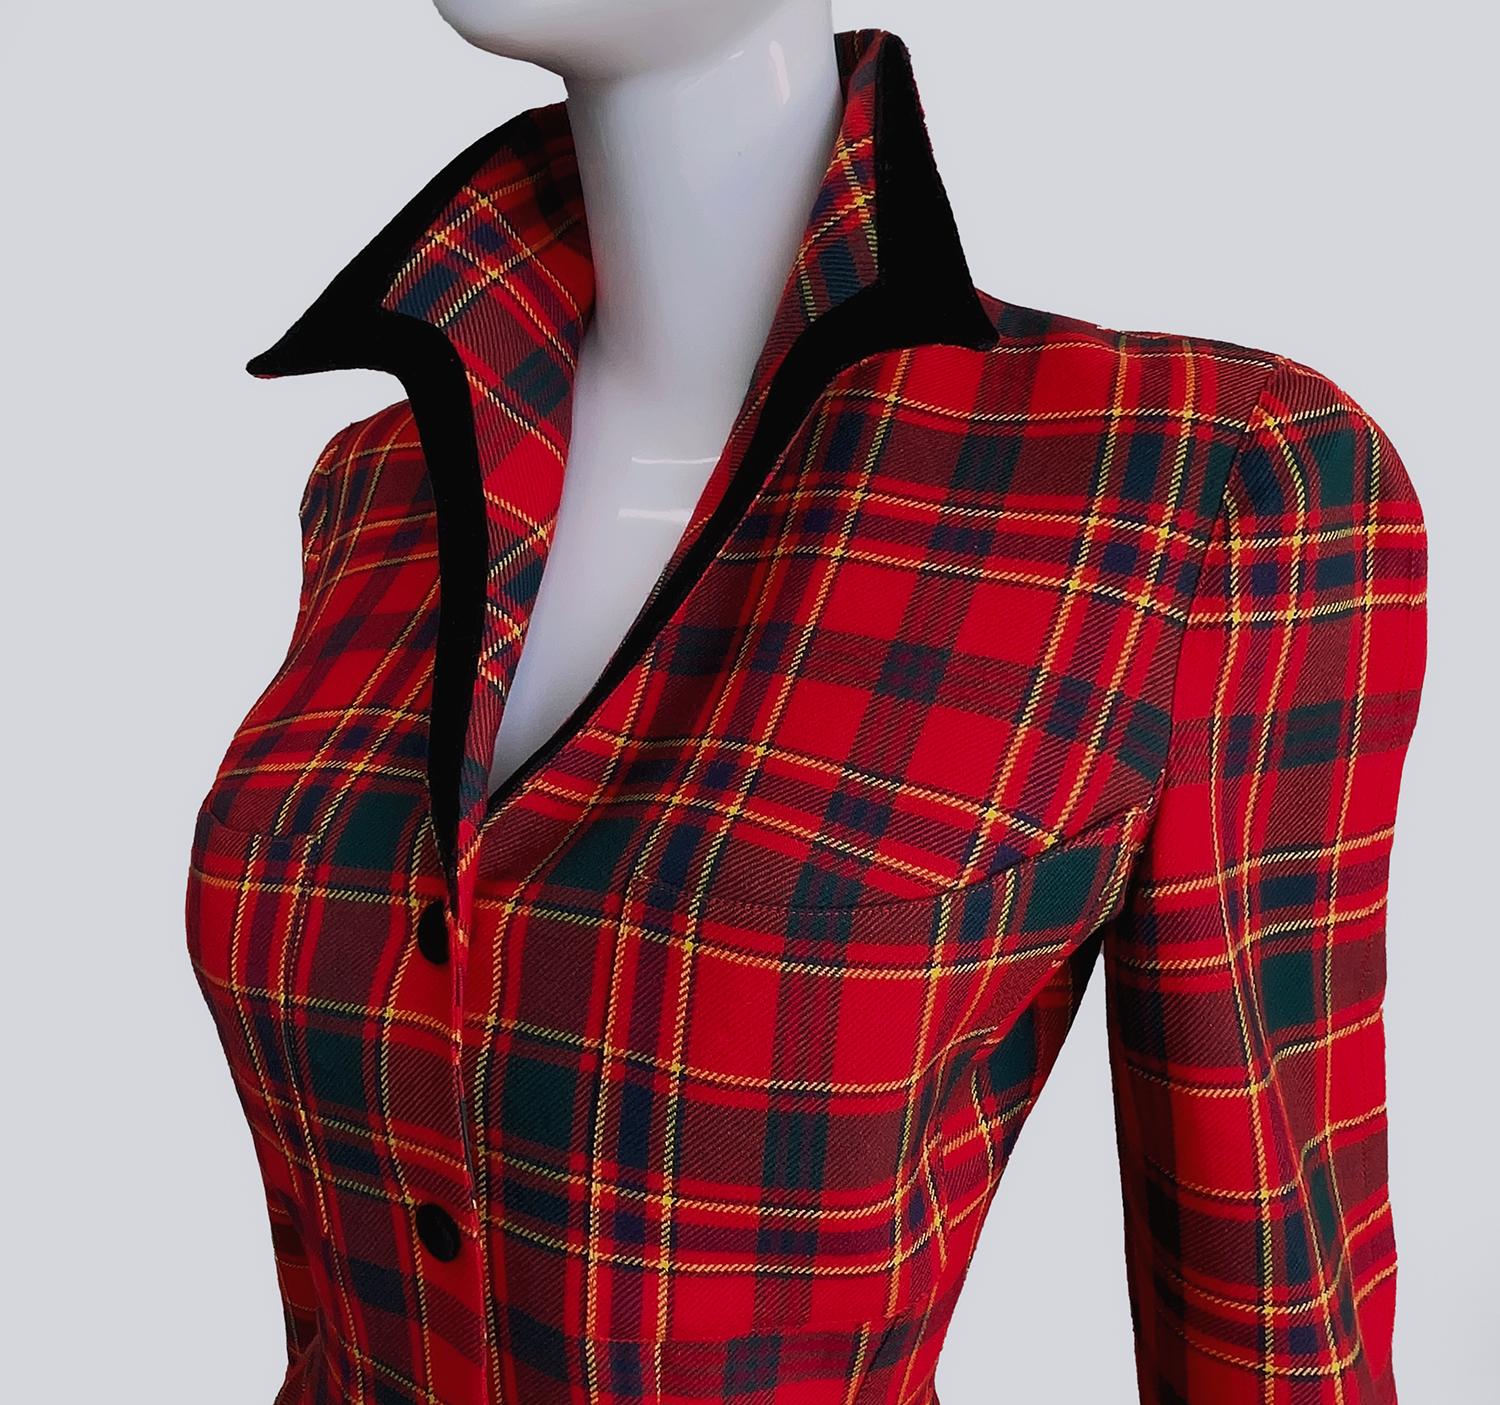 Stunning late 1980s / early90s Thierry Mugler signature sculpted blazer jacket. Timeless and extremely bautiful red tartan jacket, dramatic silhouette fiitted waist and pointy sharp details. Plaid high quality wool with black velvet collar, cuffs